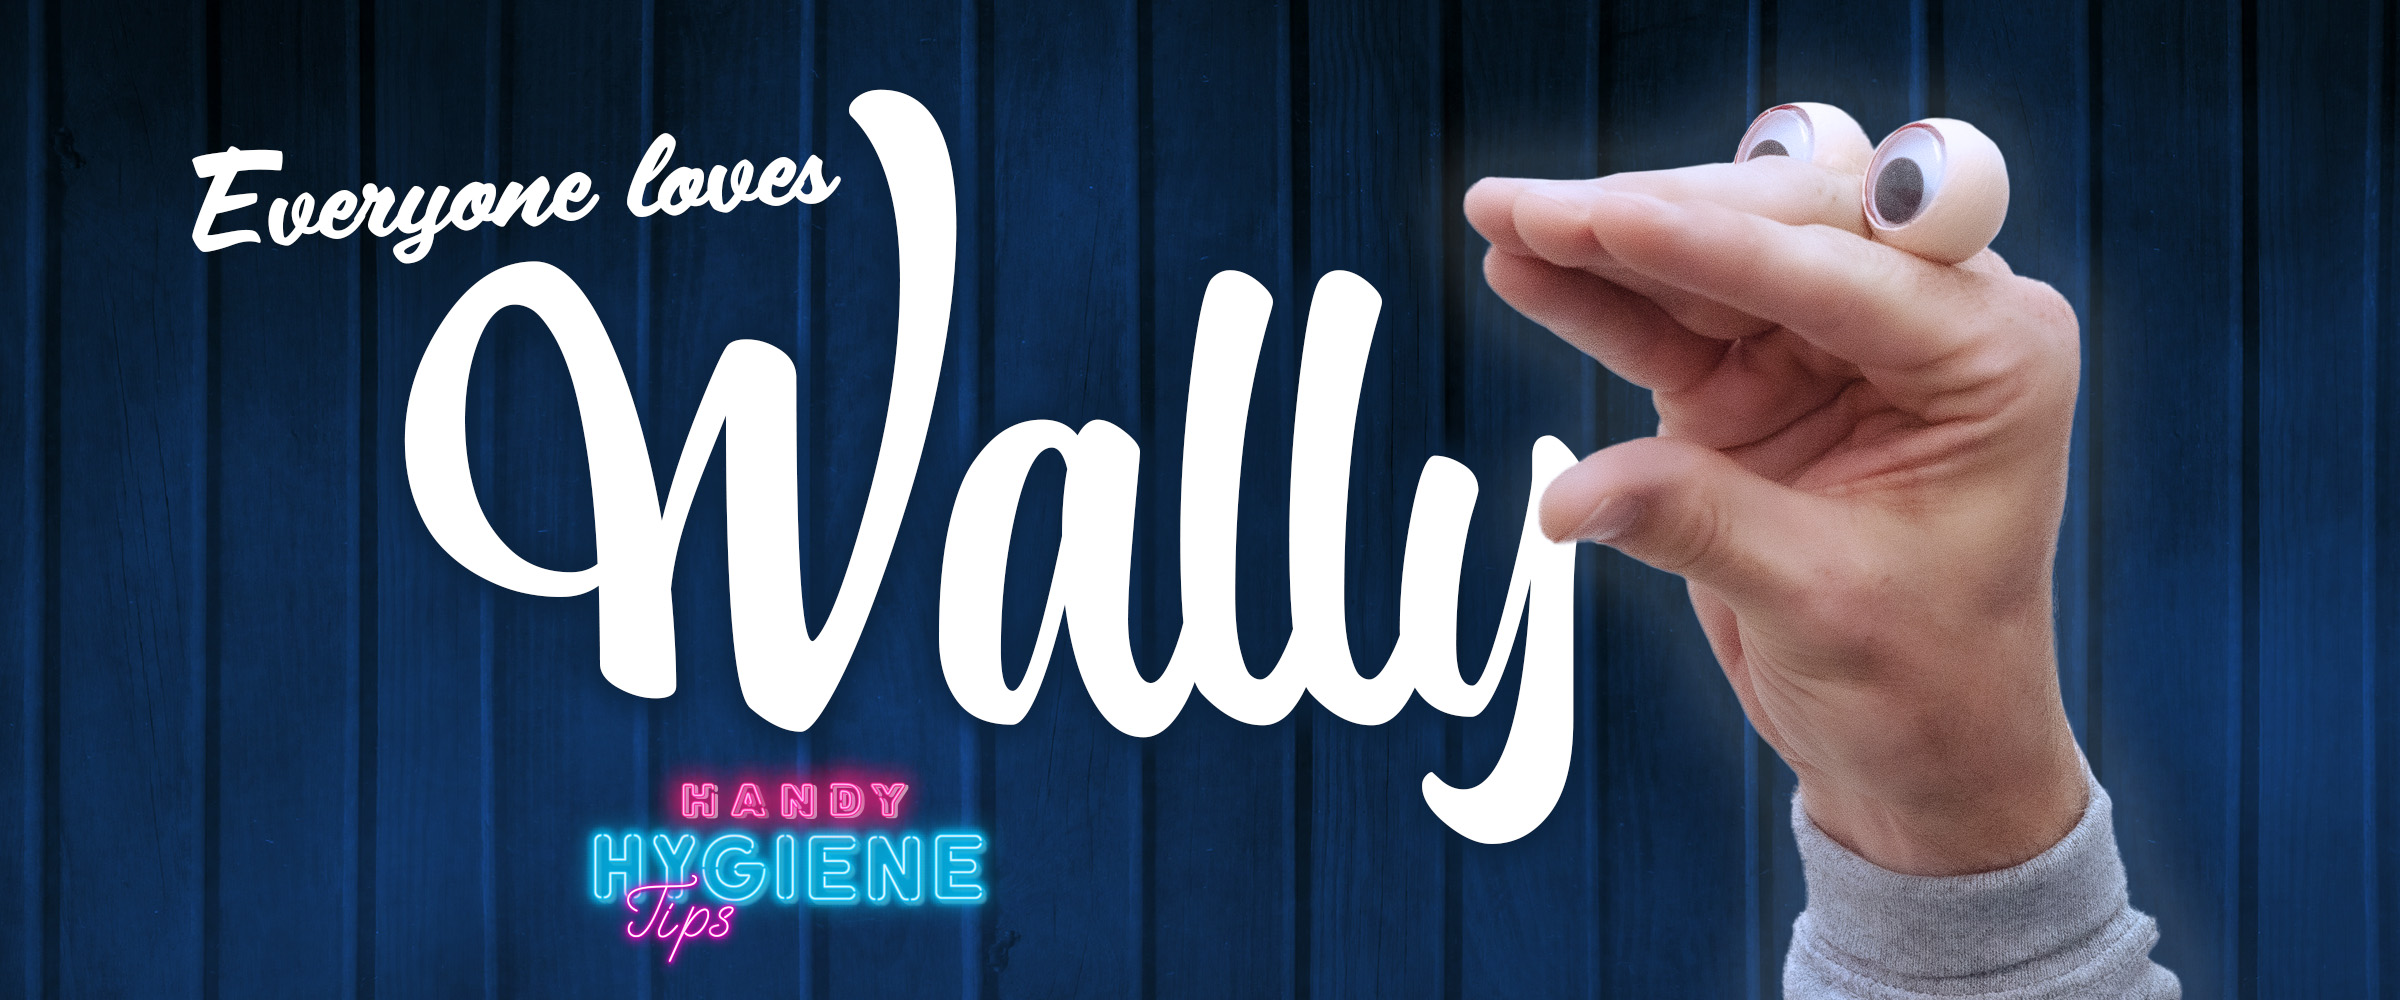 Image of hand puppet Wally Vandehand paired with text: Everyone Loves Wally; Handy Hygiene Tips